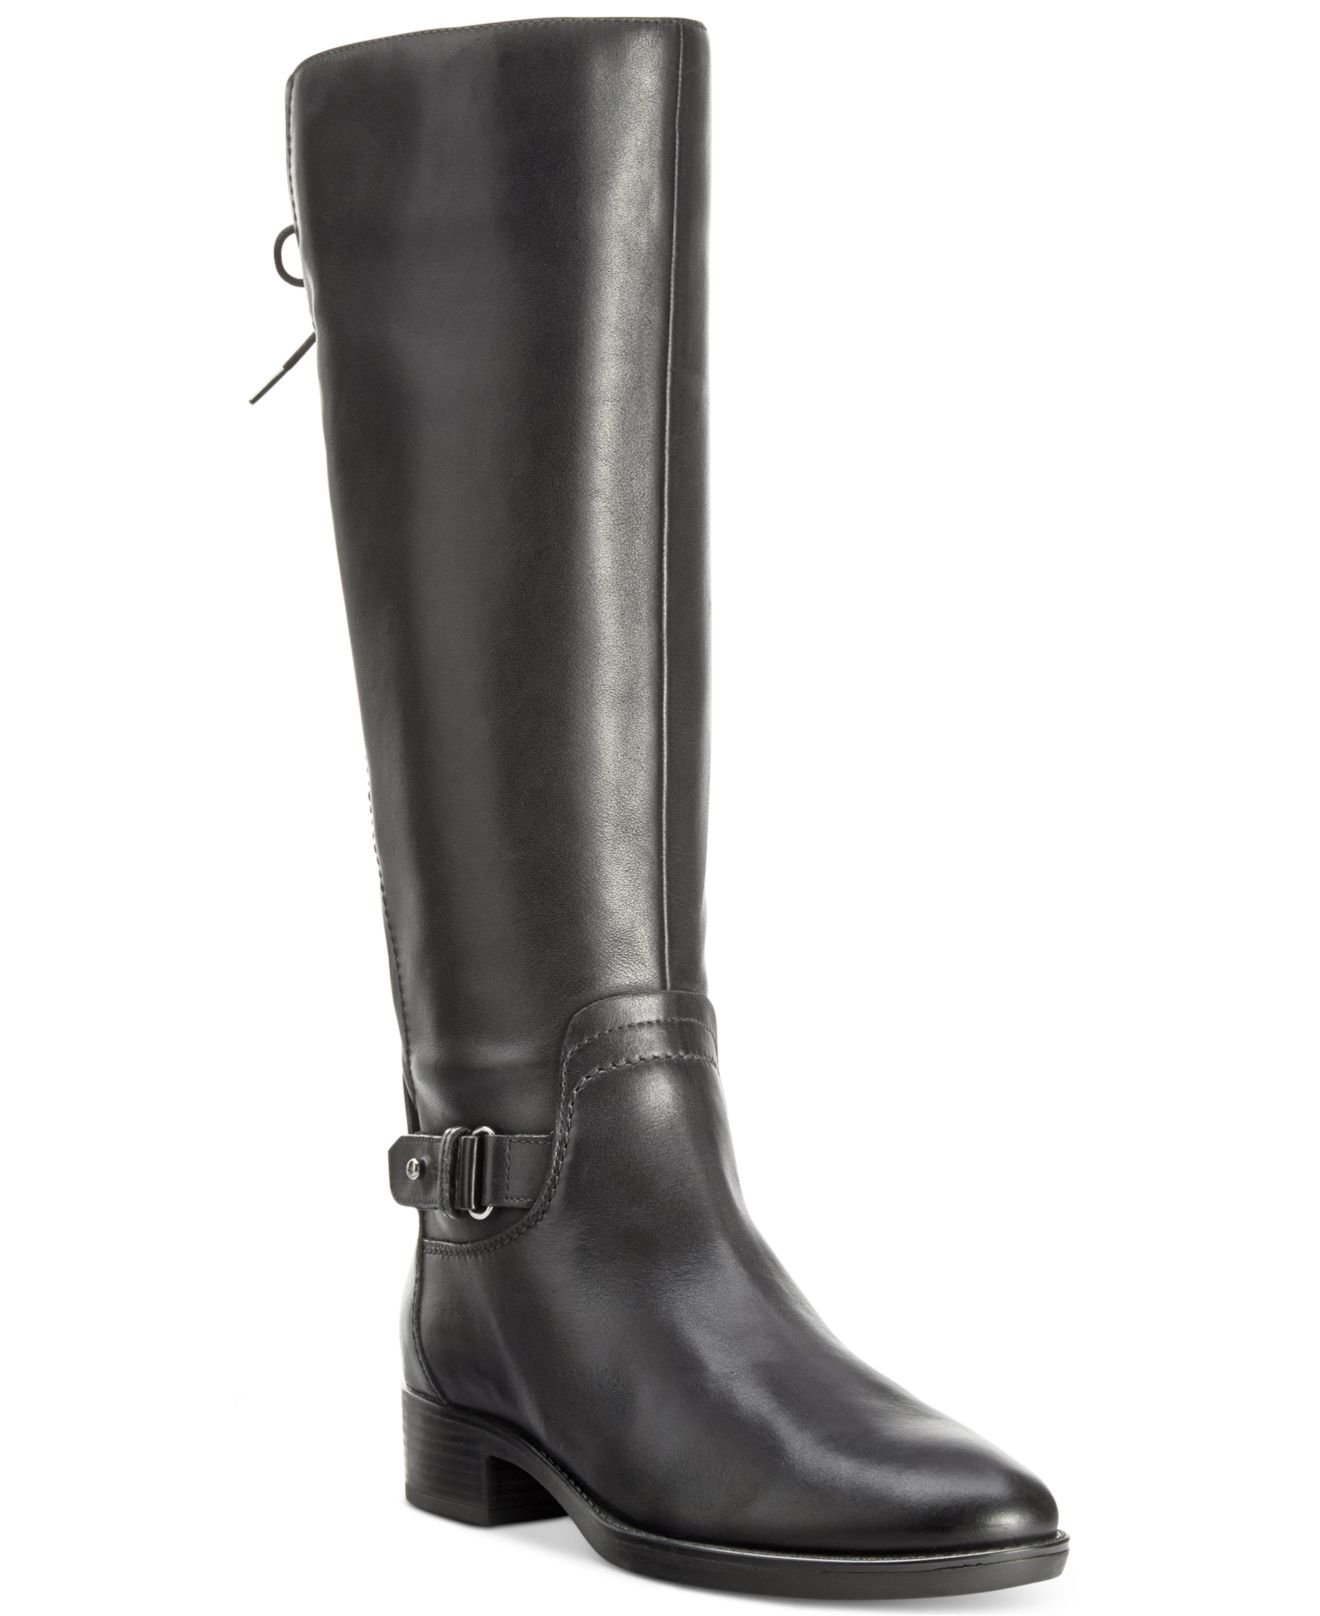 Lyst - Geox D Felicity Tall Boots in Black